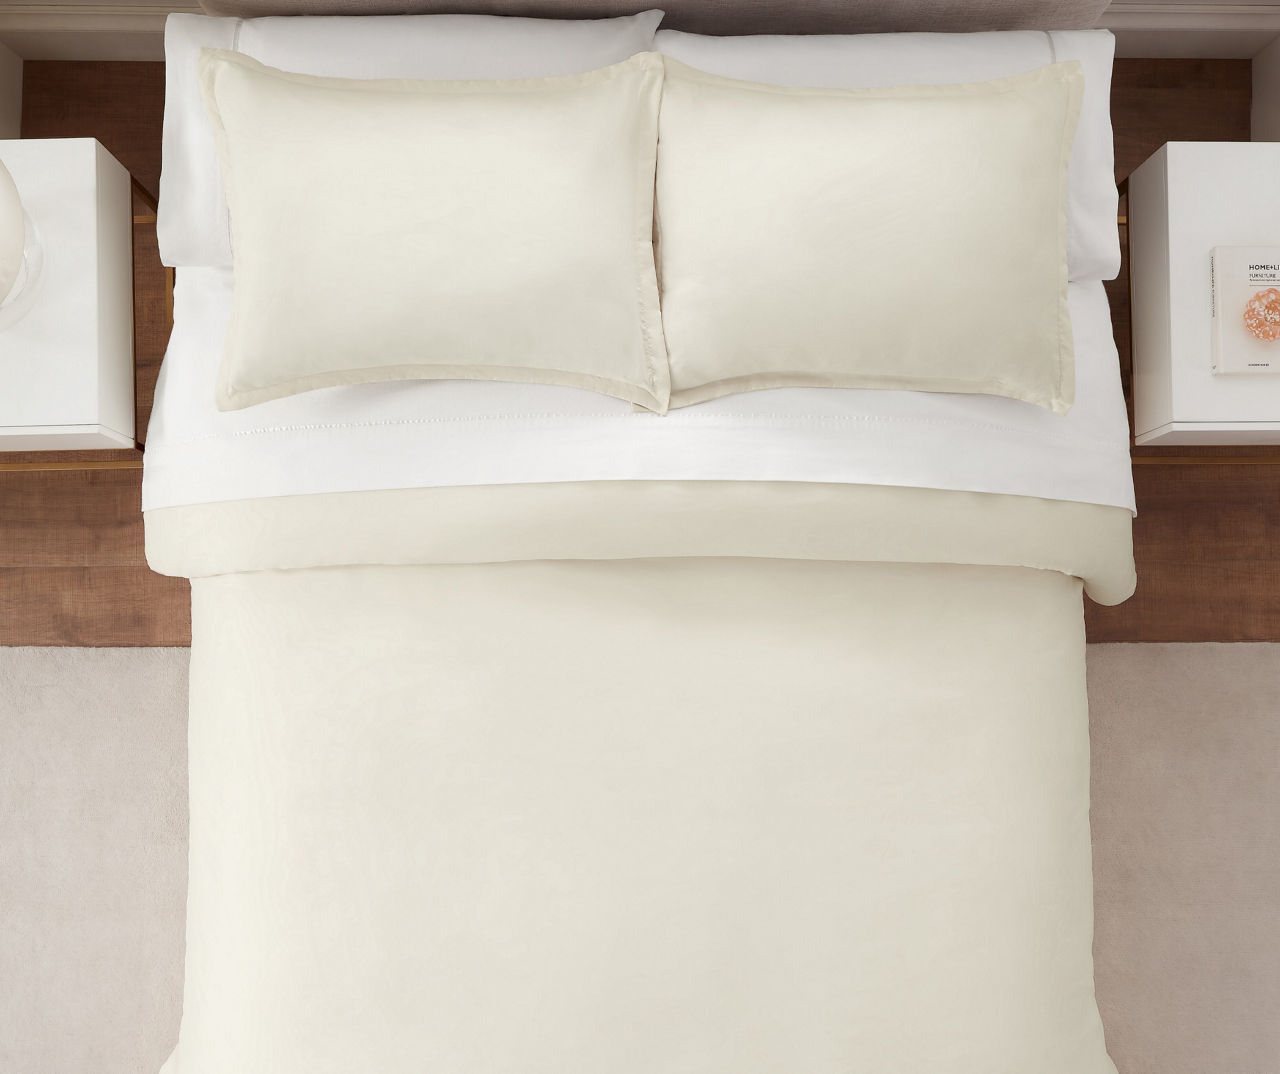 Ivory Simply Clean Full/Queen 3-Piece Duvet Cover Set